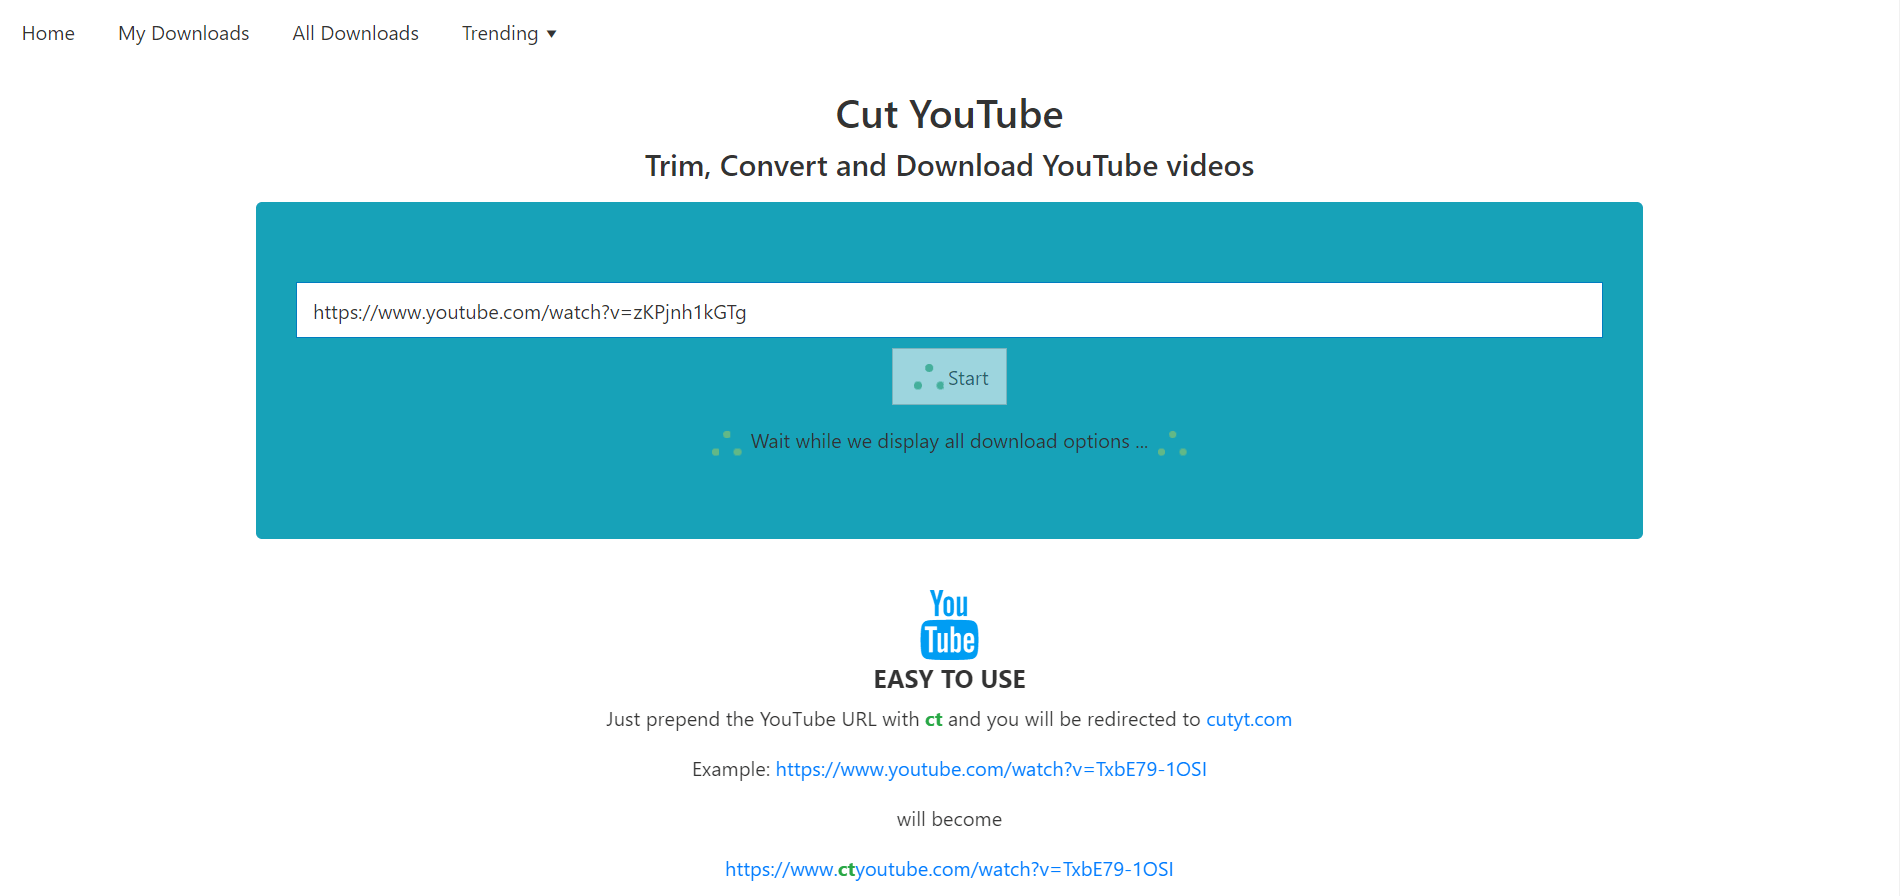 import video into cut youtube video